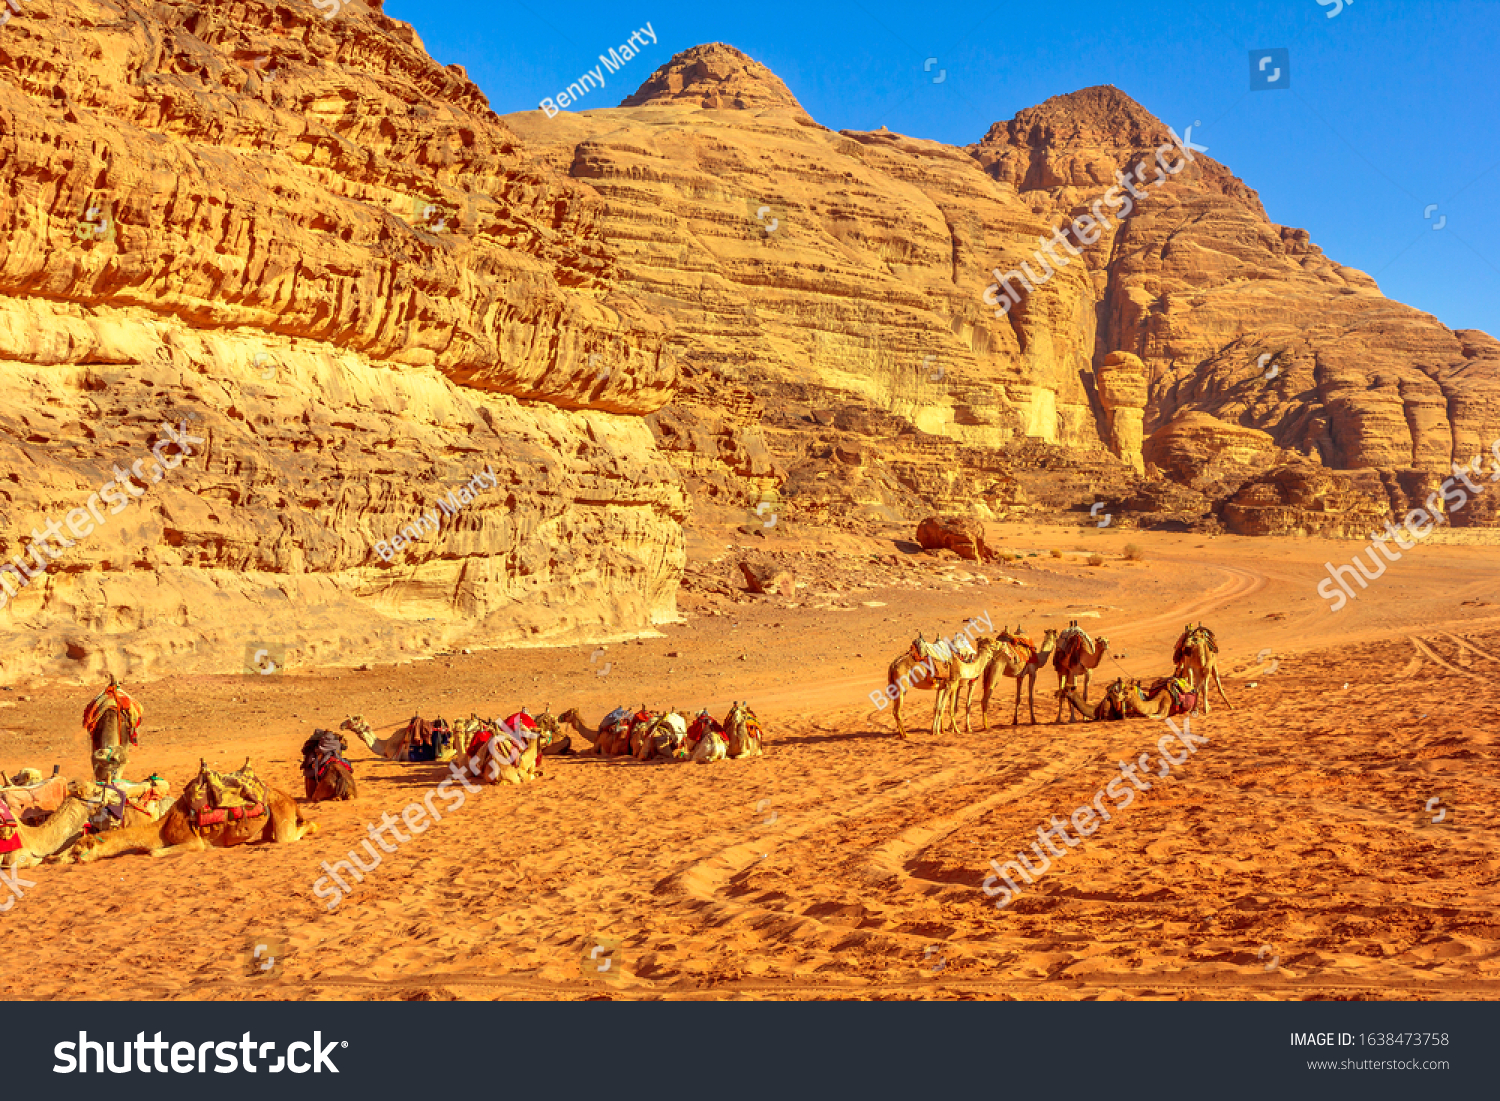 Group of dromedary camels waiting for tourists in the middle of the Valley of the Moon, Wadi Rum Desert, southern Jordan. Popular tourist destination for spectacular sandstone and granite rock. #1638473758